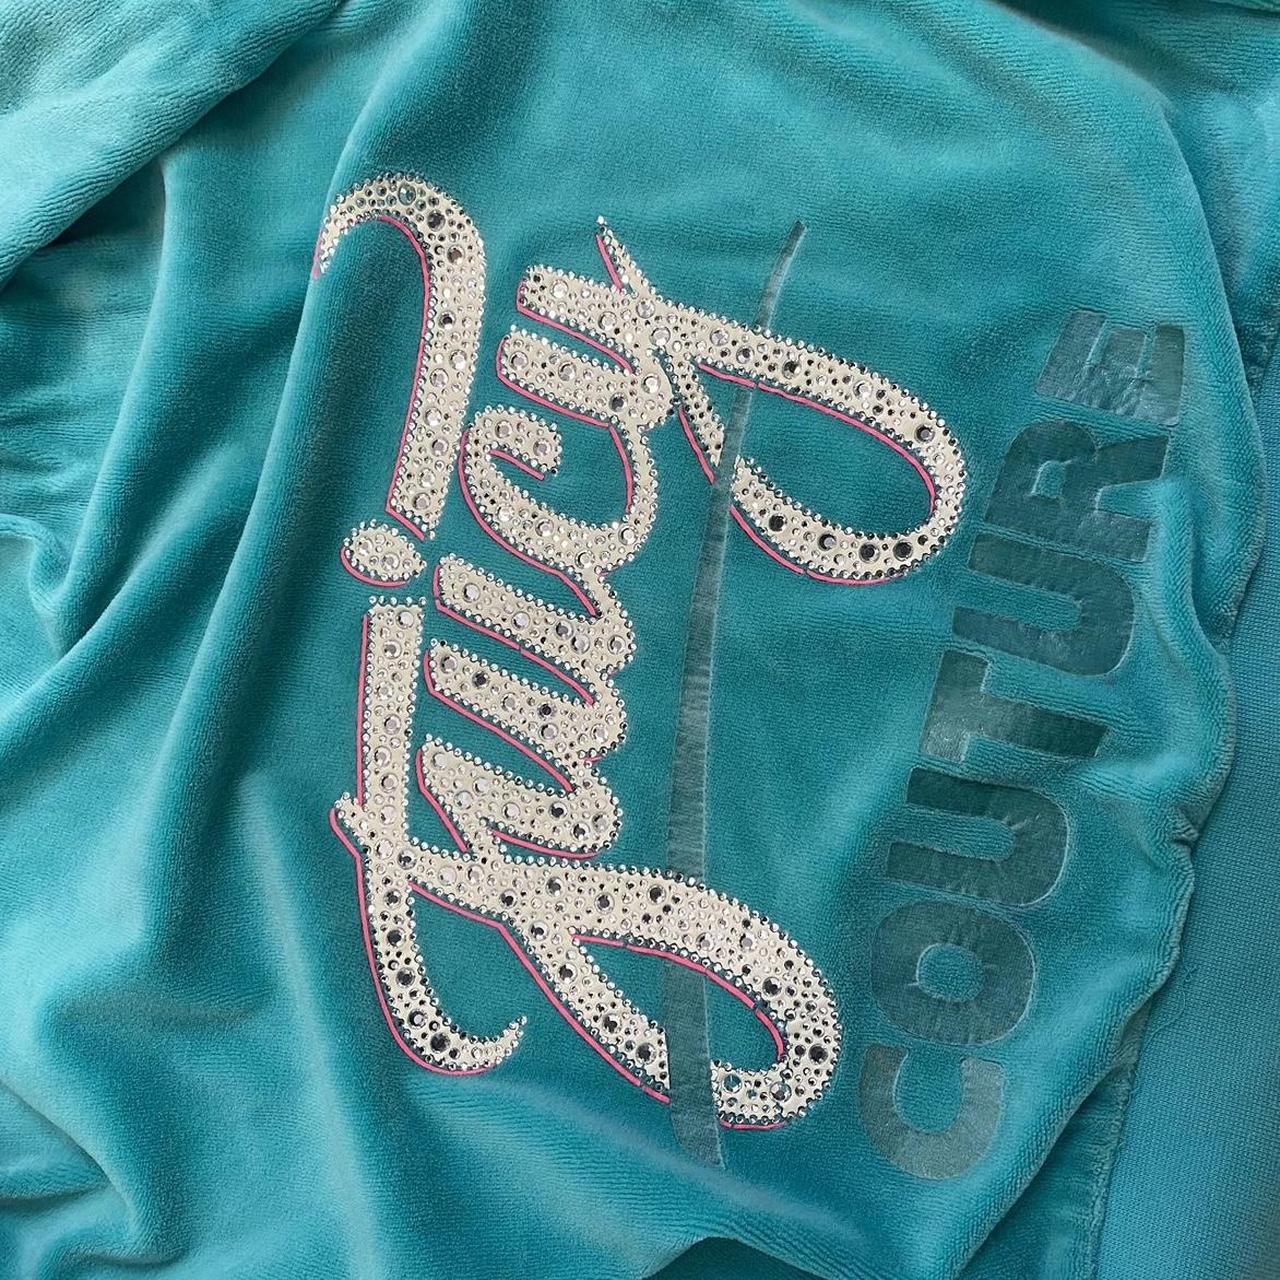 Juicy couture hooded jacket